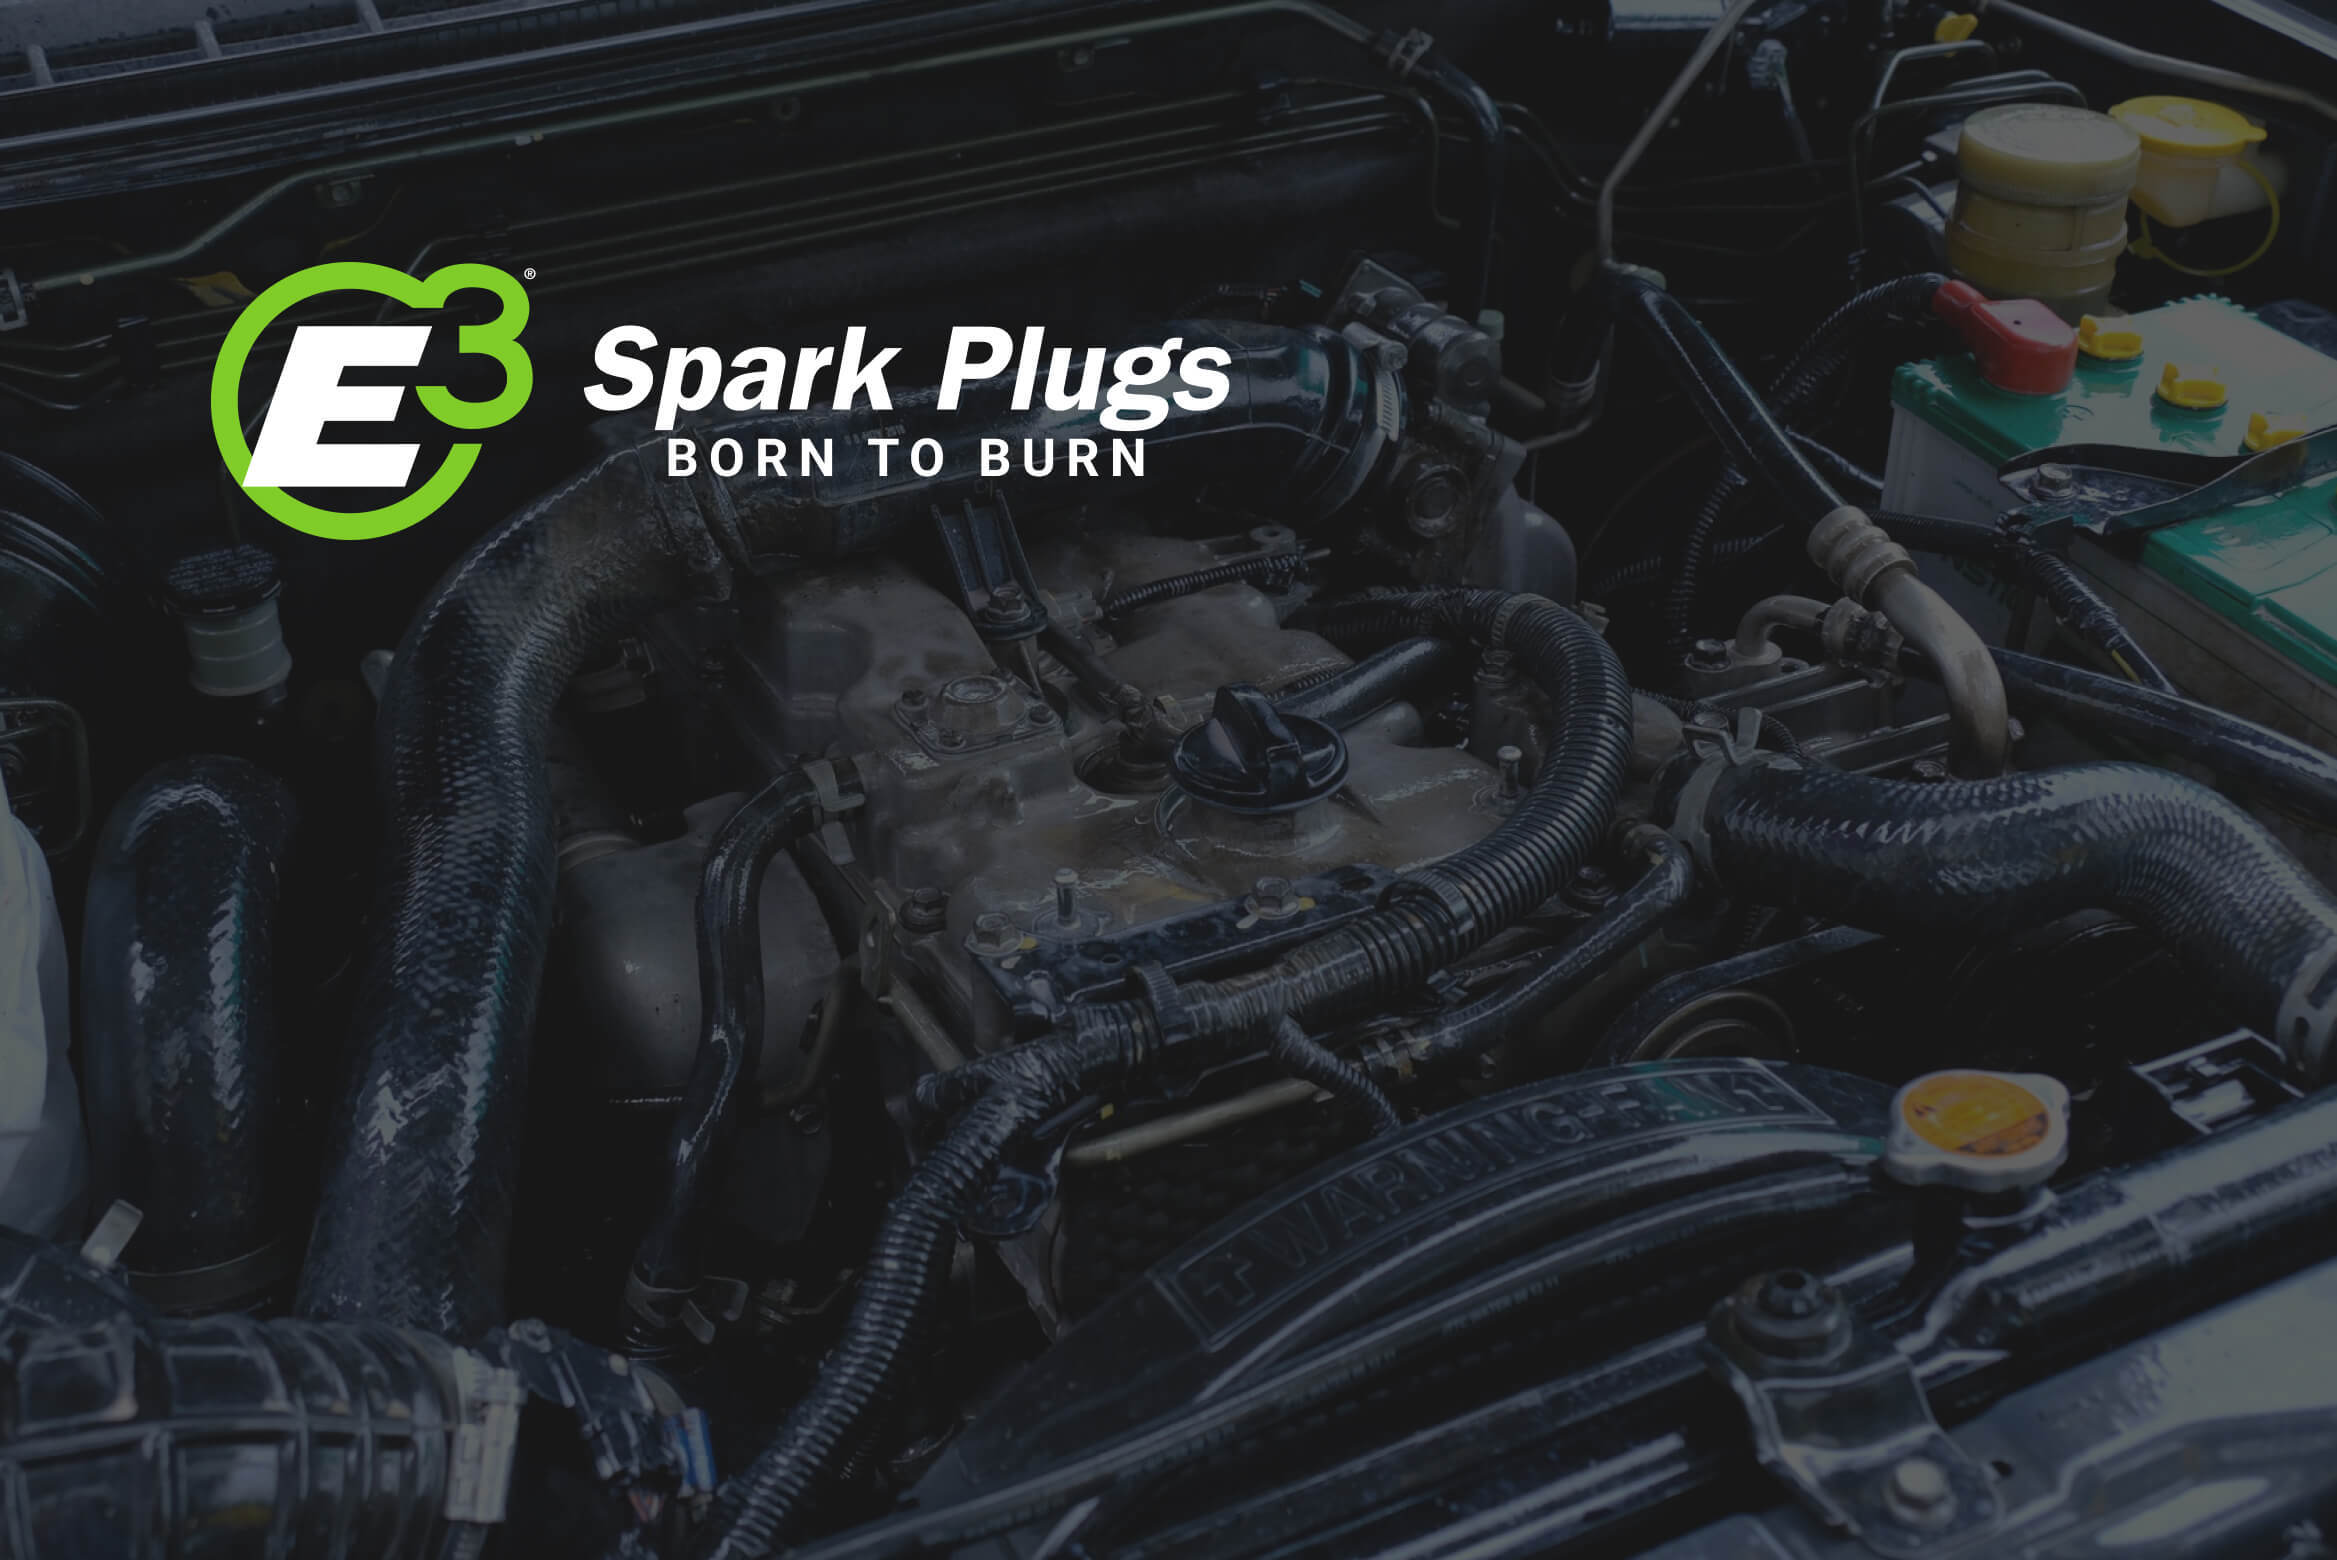 Common Myths About Spark Plugs for Motorcycles